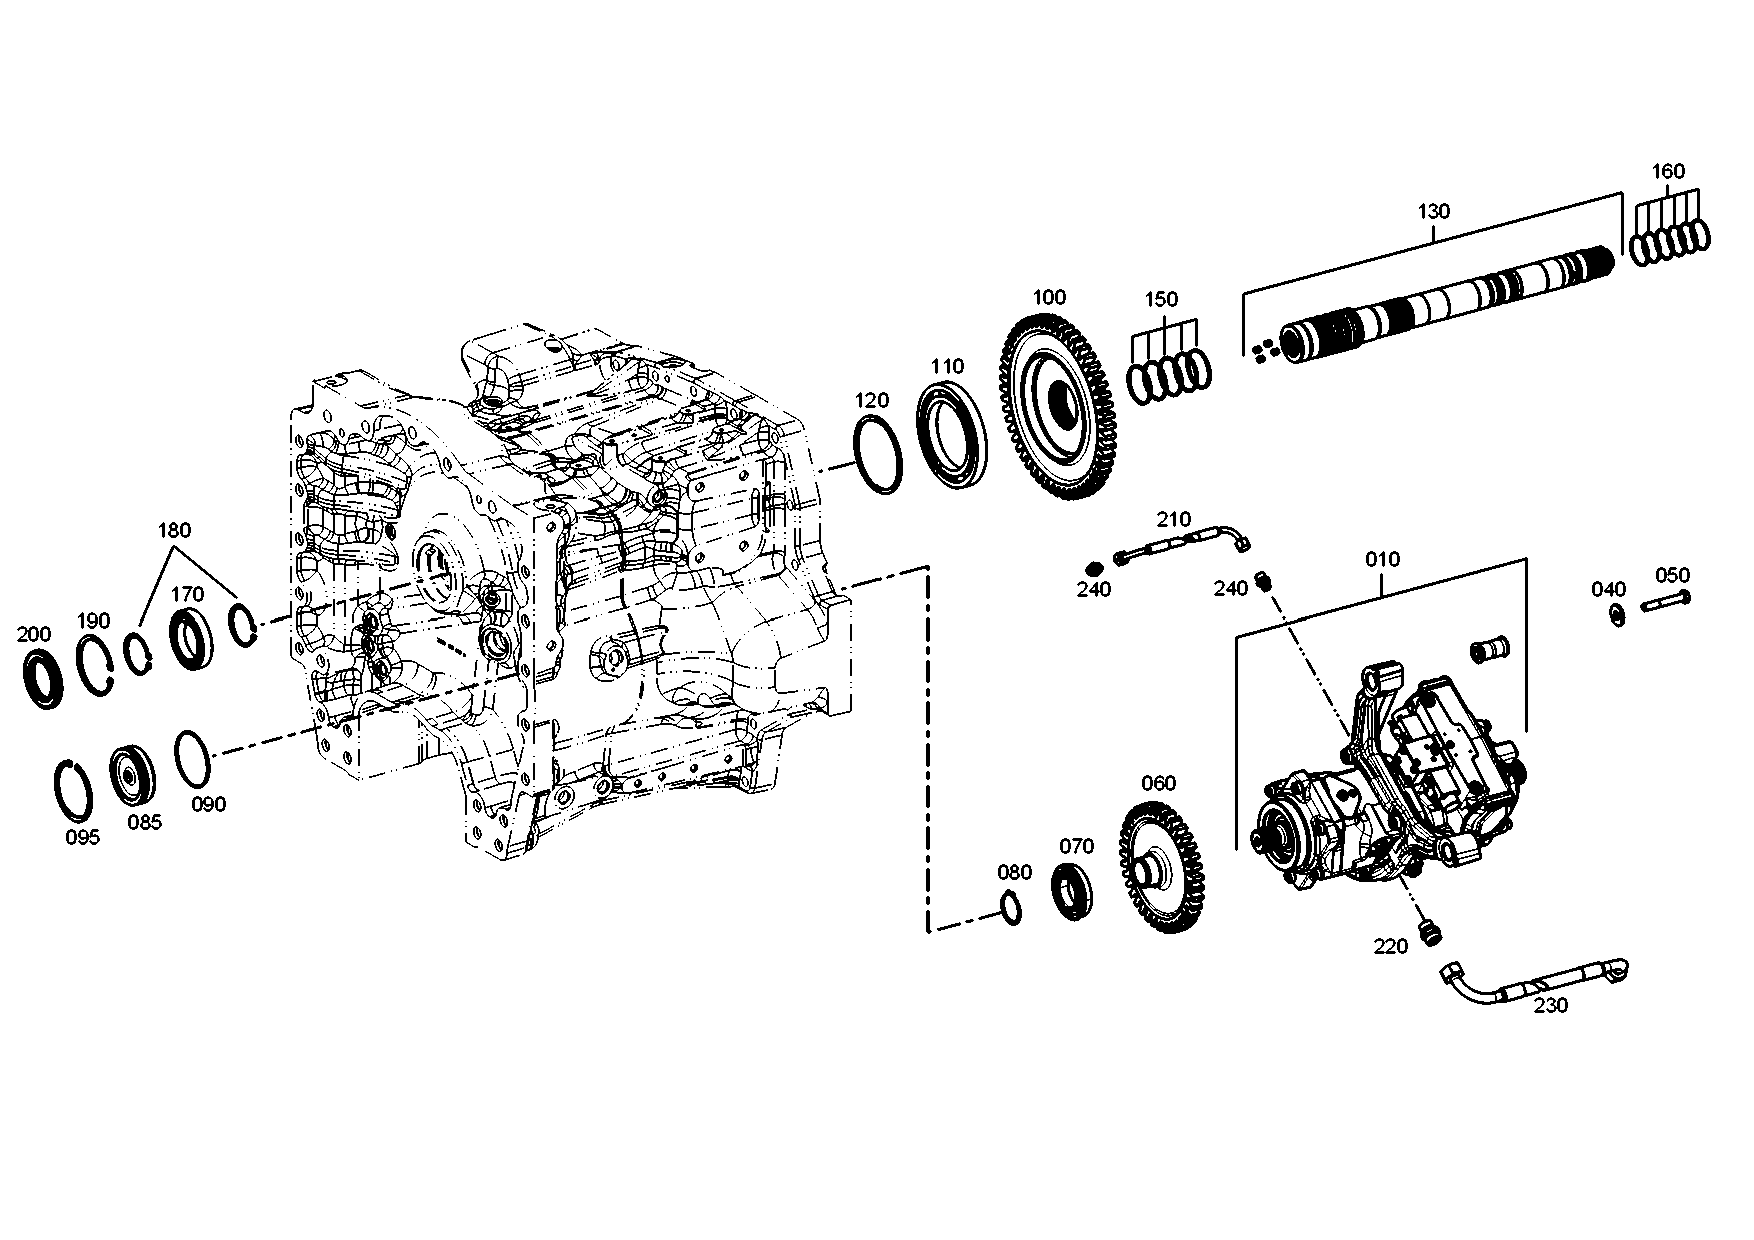 drawing for CNH NEW HOLLAND 185533A1 - BALL BEARING (figure 2)